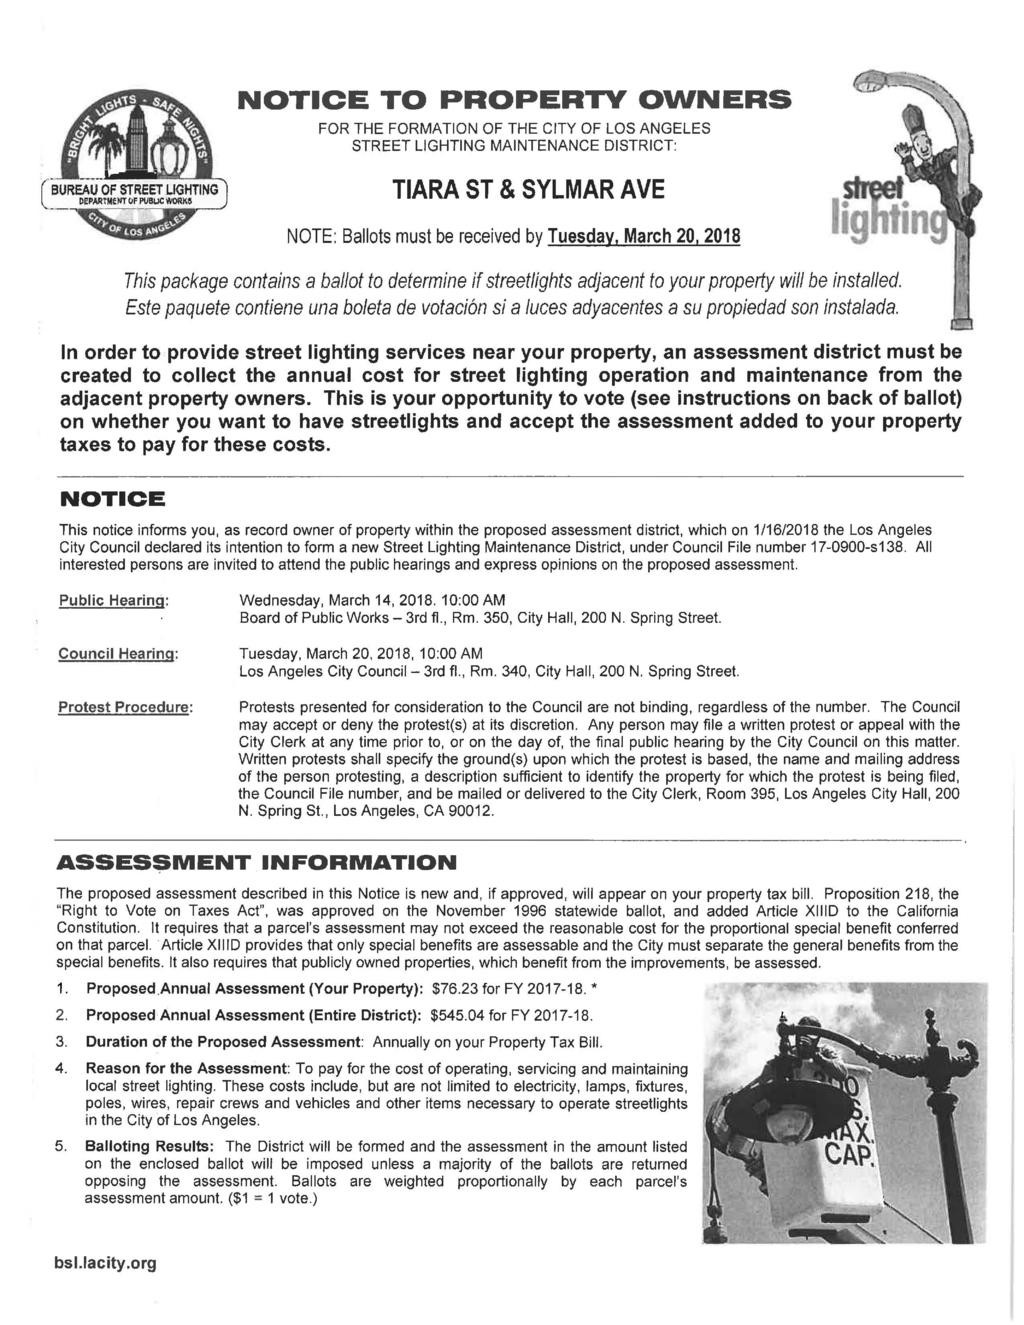 NOTICE TO PROPERTY OWNERS FOR THE FORMATION OF THE CITY OF LOS ANGELES STREET LIGHTING MAINTENANCE DISTRICT: ( BUREAU OF STREET LIGHTING DEPARTMENT OF TOUC *OSK» TIARA ST & SYLMAR AVE.